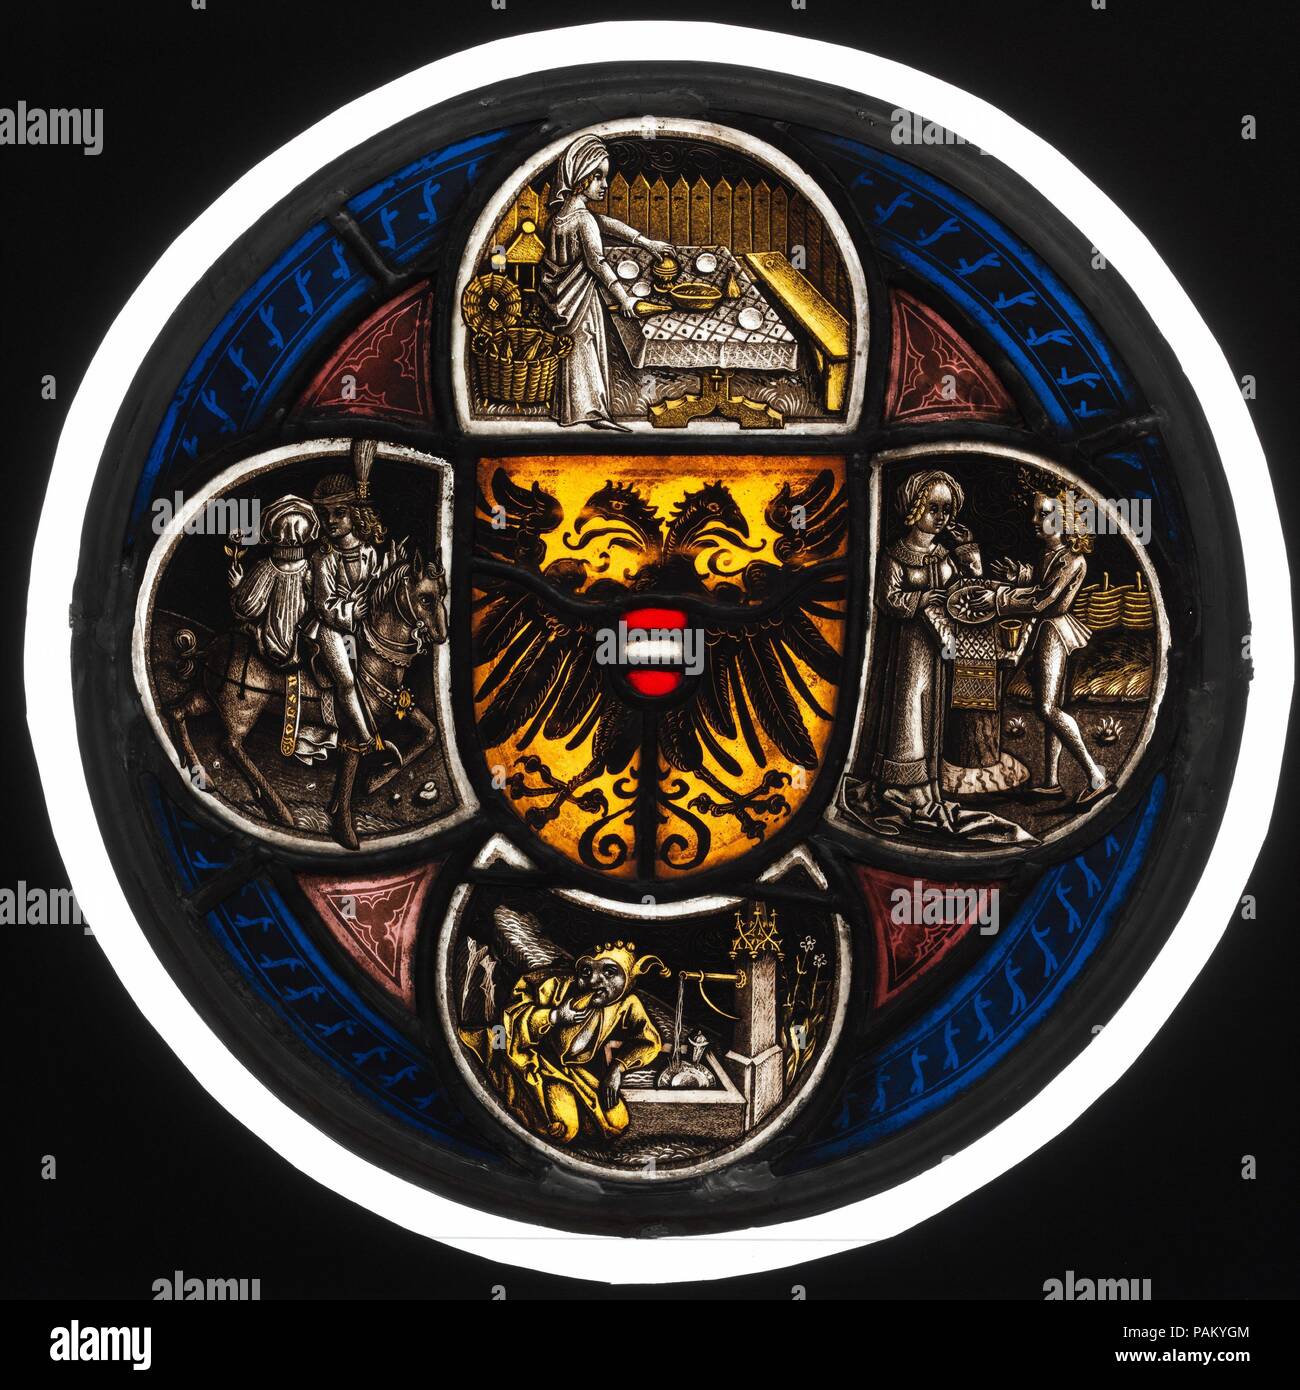 Quatrefoil Roundel with Arms and Secular Scenes. Culture: German. Dimensions: Diam: 12 1/4 in. (31.1 cm). Date: 1490-1500.  In the center of this panel are the imperial arms of Austria. The scenes in the quatrefoil represent a variety of secular vignettes. These scenes may signify a tournament masquerade of the type held in Nuremberg before Lent, which would explain the presence of fools, feasts, and lovers. Such imagery was understood as social satire in late medieval art. The number of similar quatrefoil panels that have survived suggests considerable popularity. The origin of the designs is Stock Photo